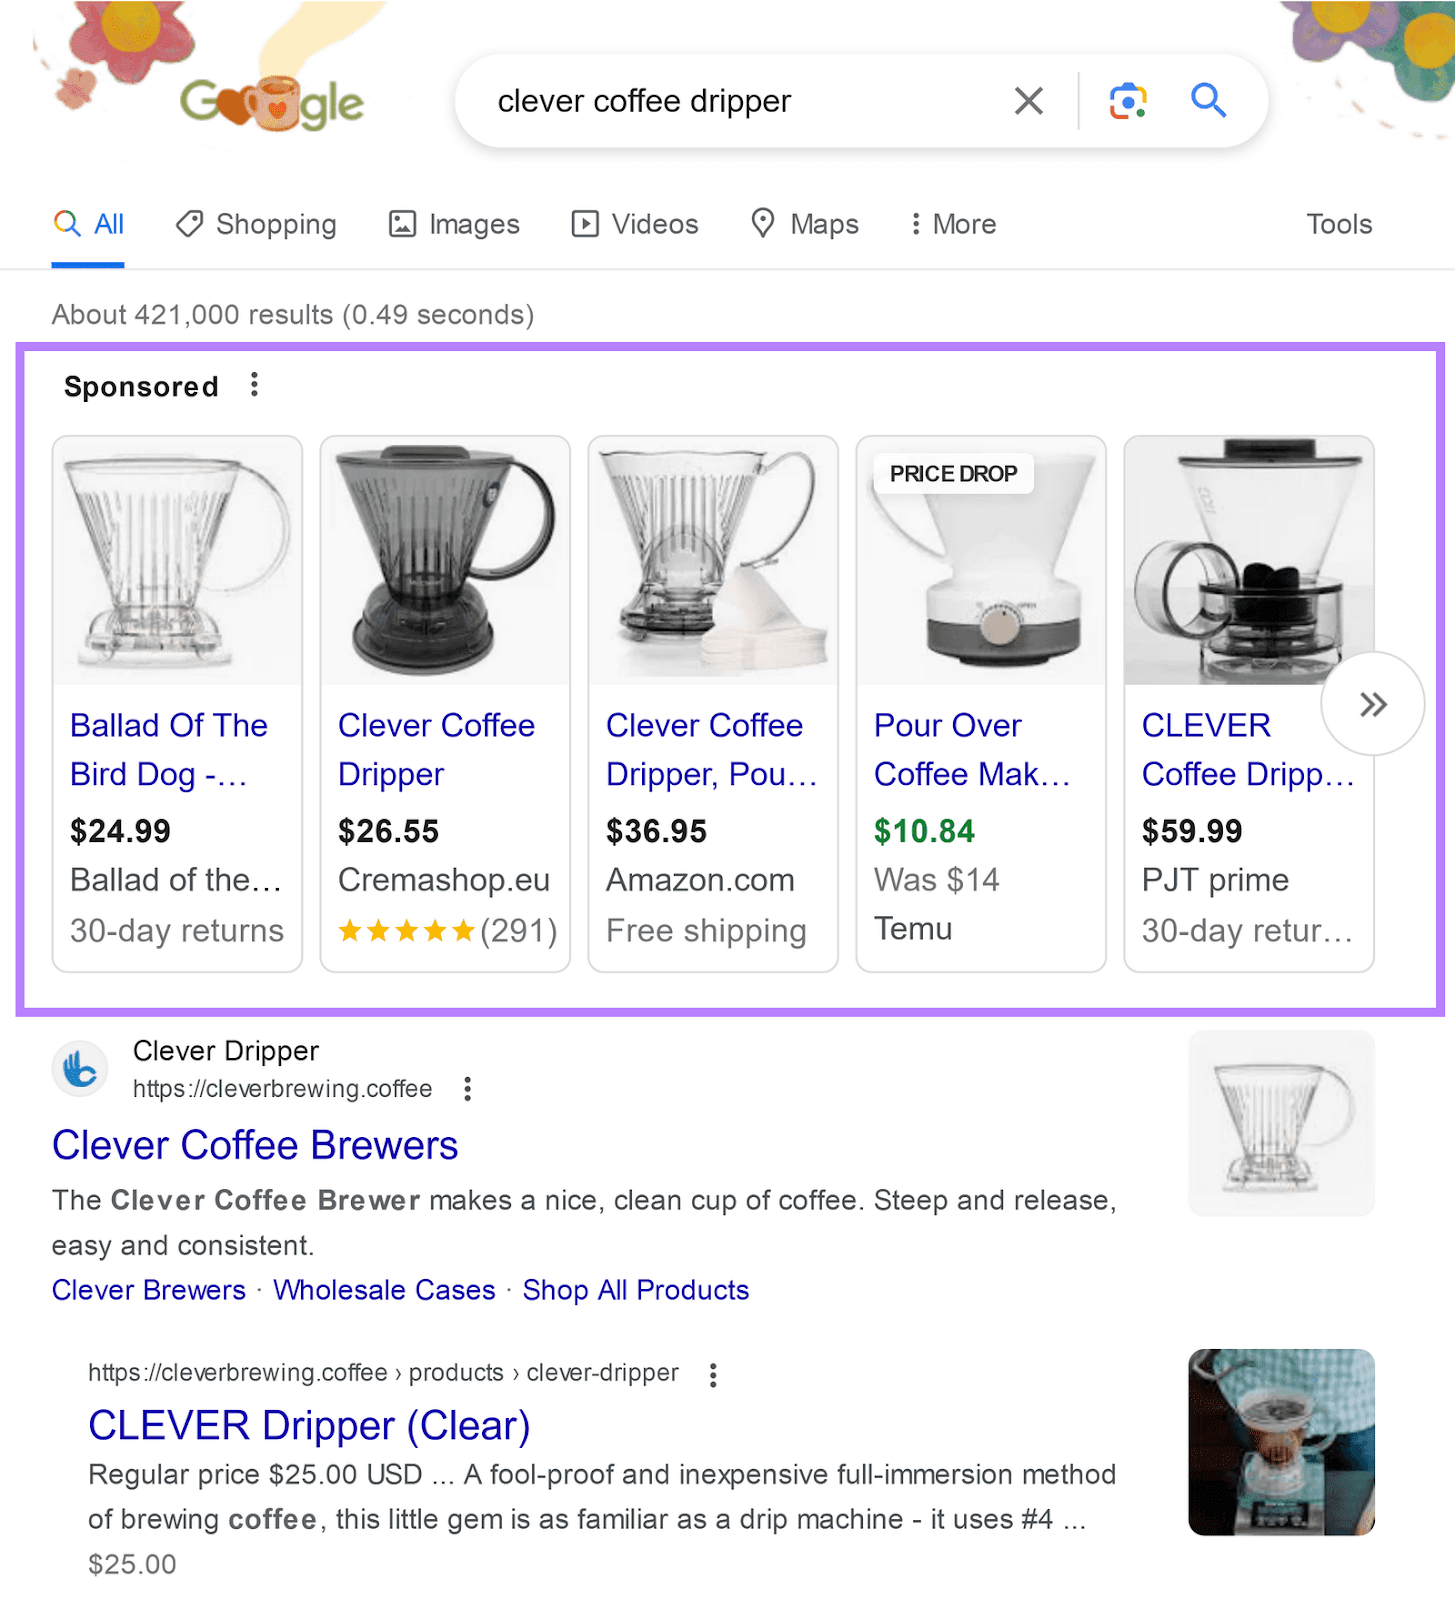 Google Shopping Ads for "clever coffee dripper" search